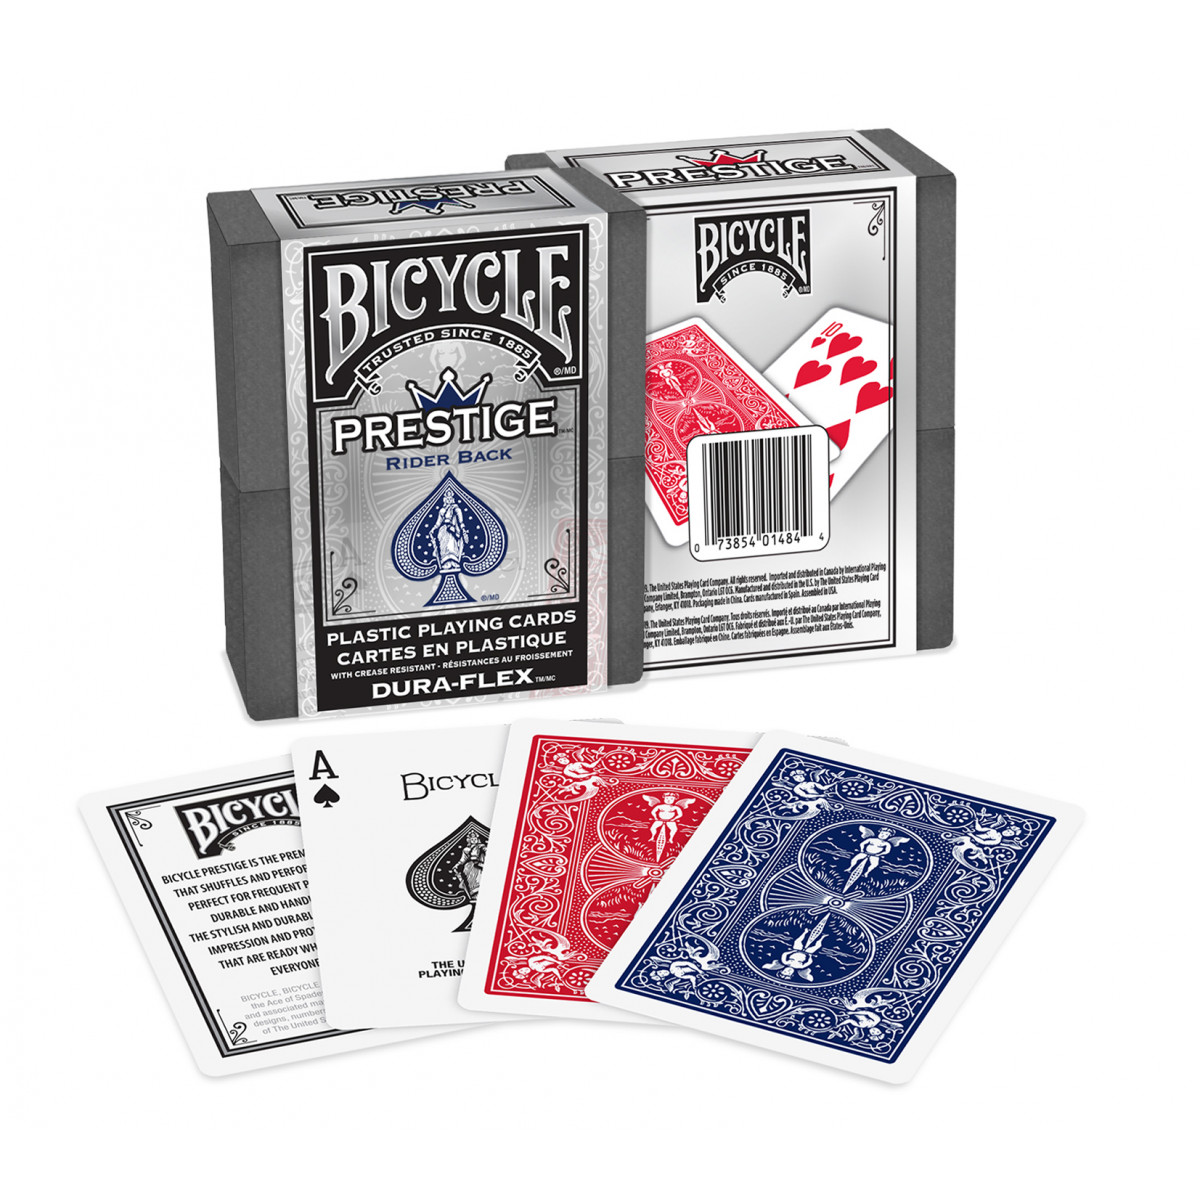 BICYCLE PRESTIGE PLAYING CARDS 100% PLASTIC DECK JUMBO INDEX RED POKER NEW 